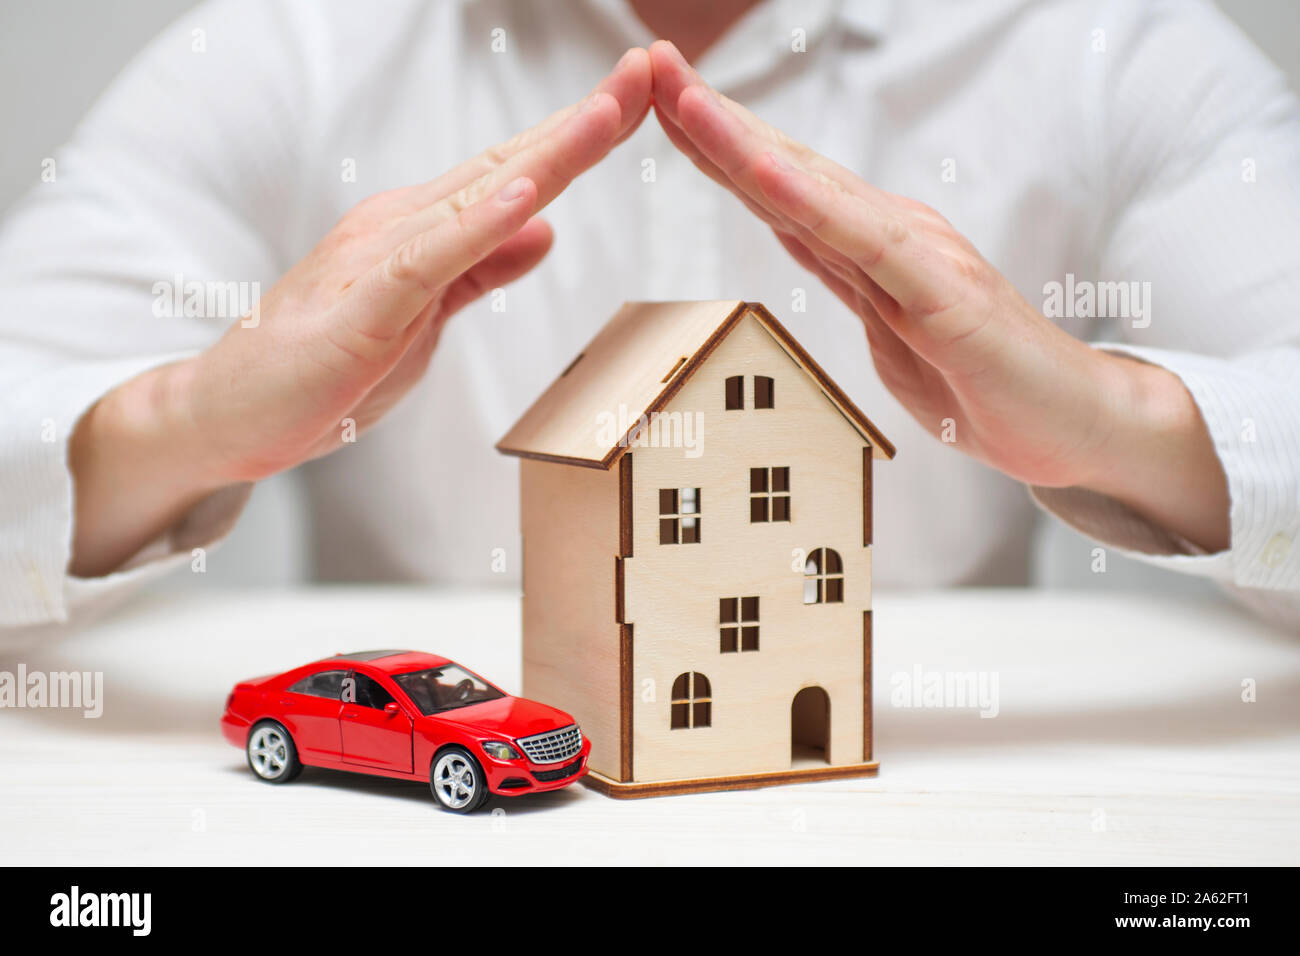 Insurance concept of car insurance, home insurance to protection by hands. House and car insurance concept. Stock Photo